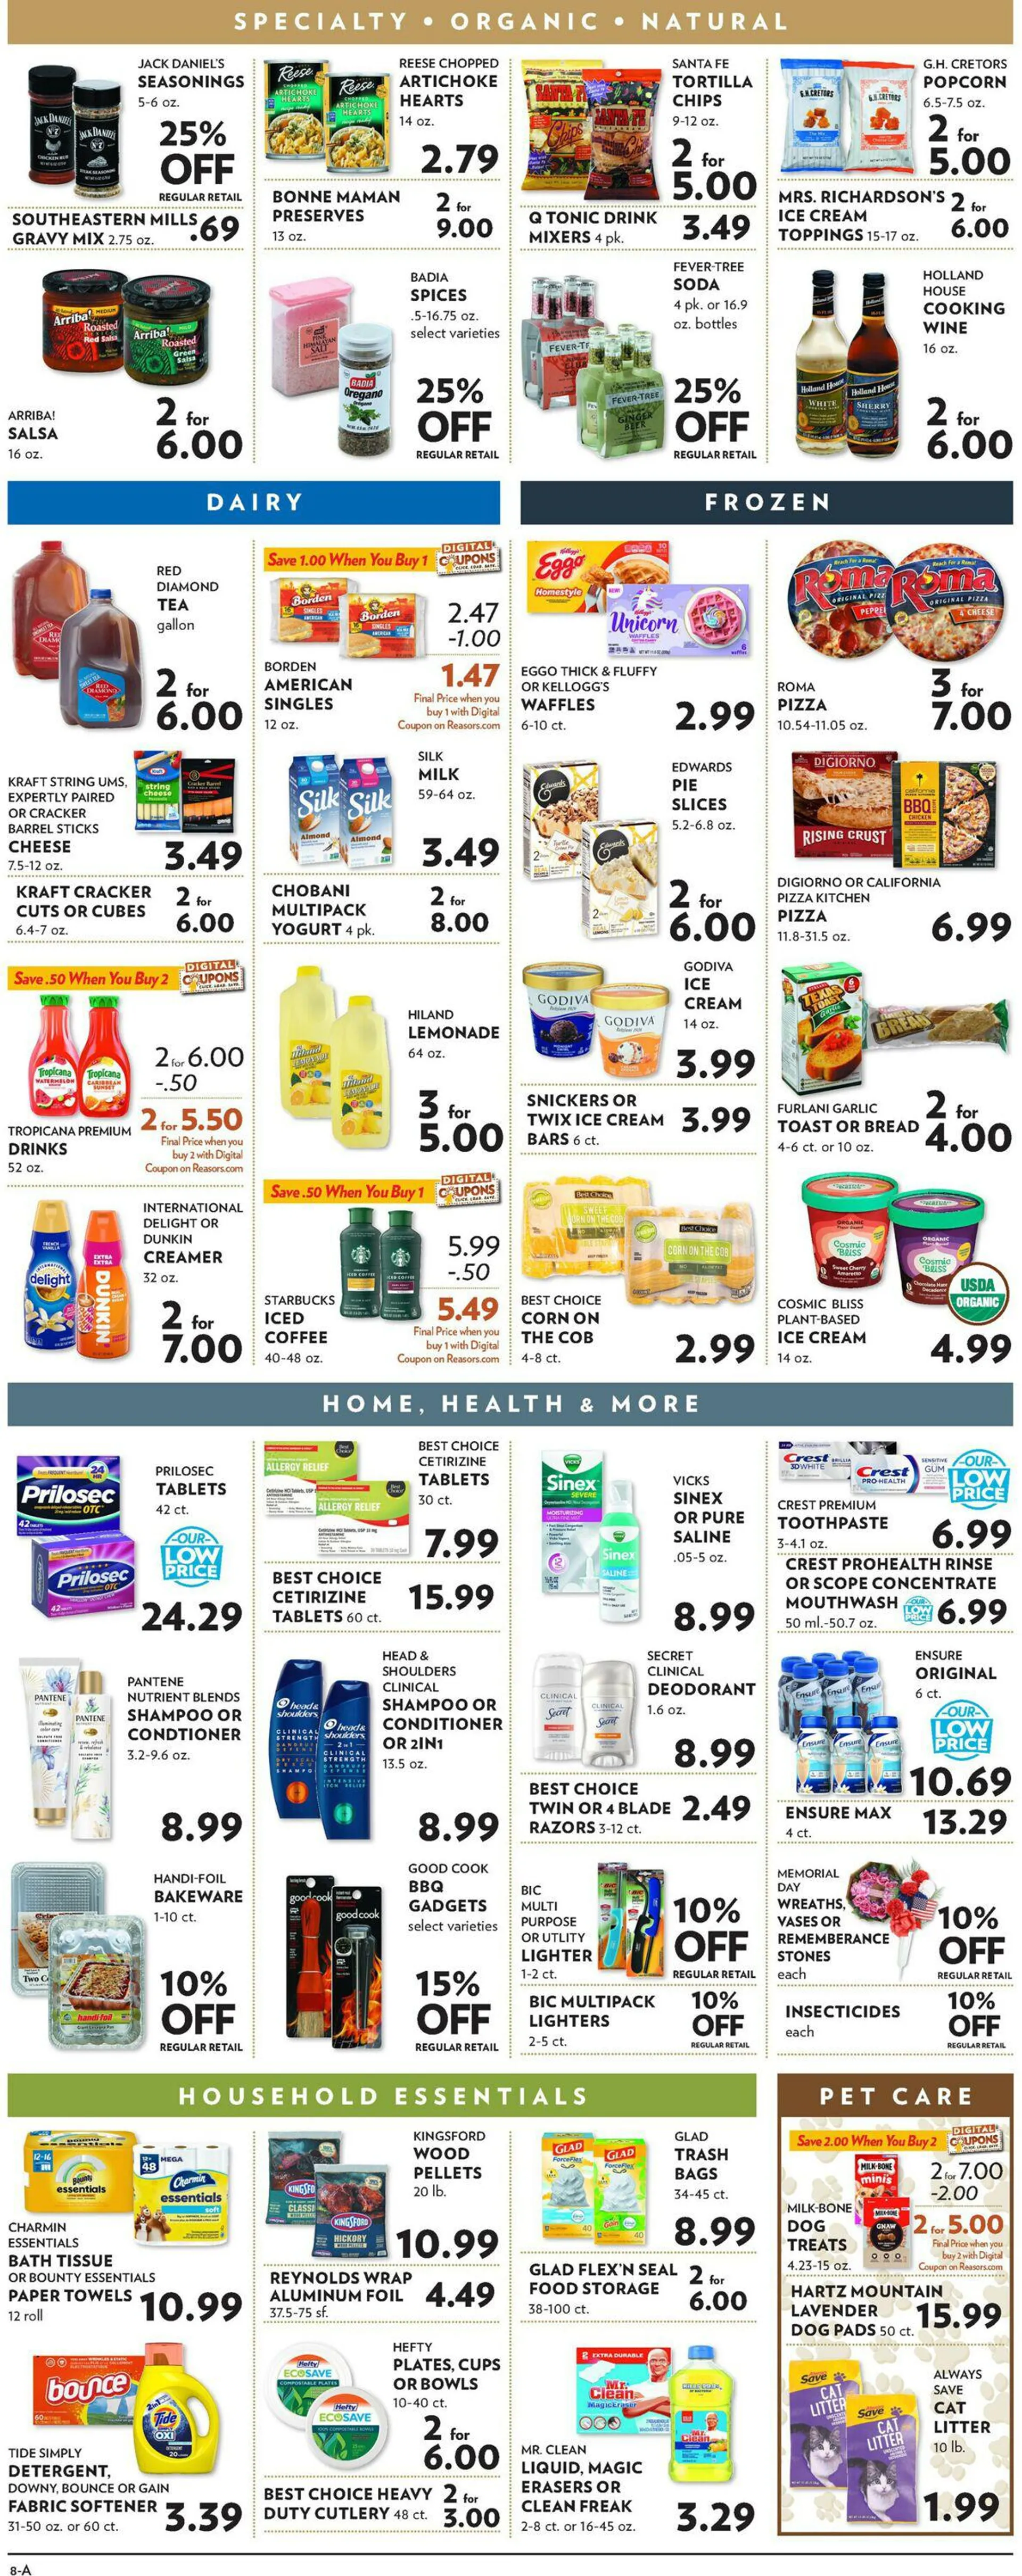 Reasors Current weekly ad - 10